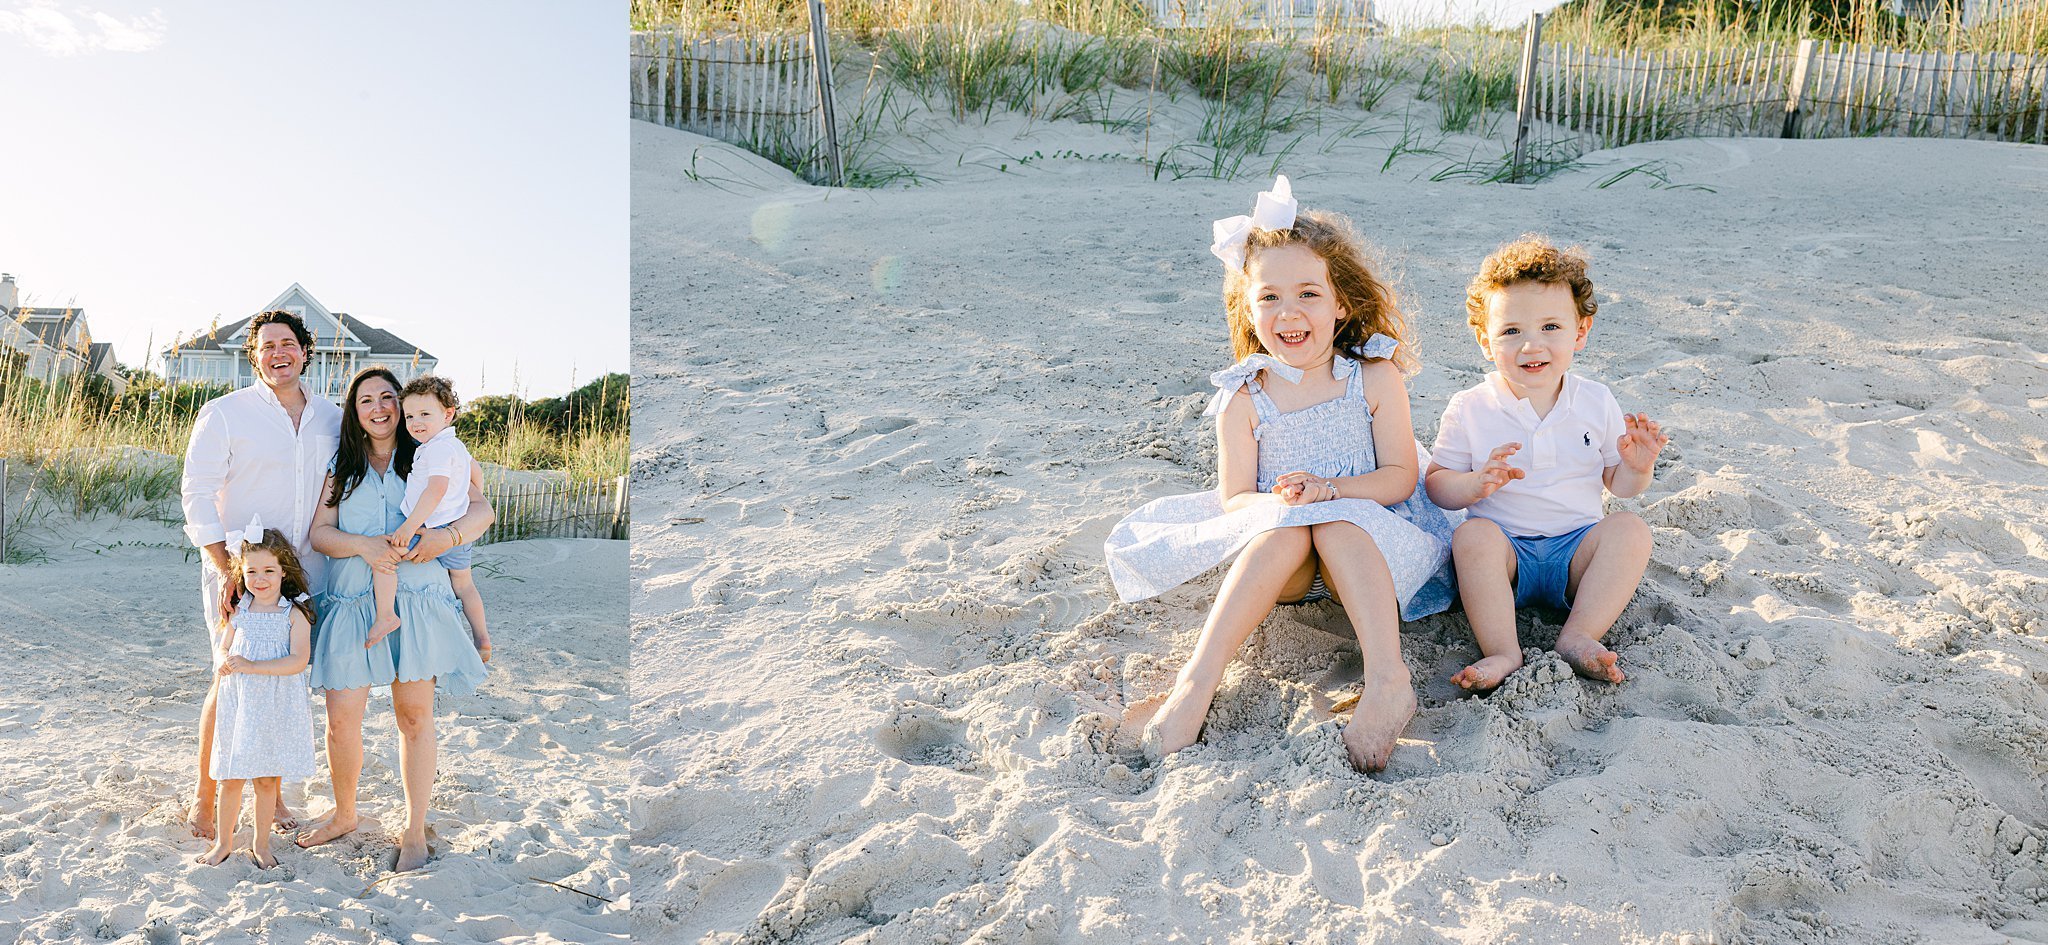 Katherine_Ives_Photography_Chod_Hilton_Head_Extended_Family_Session_83.JPG